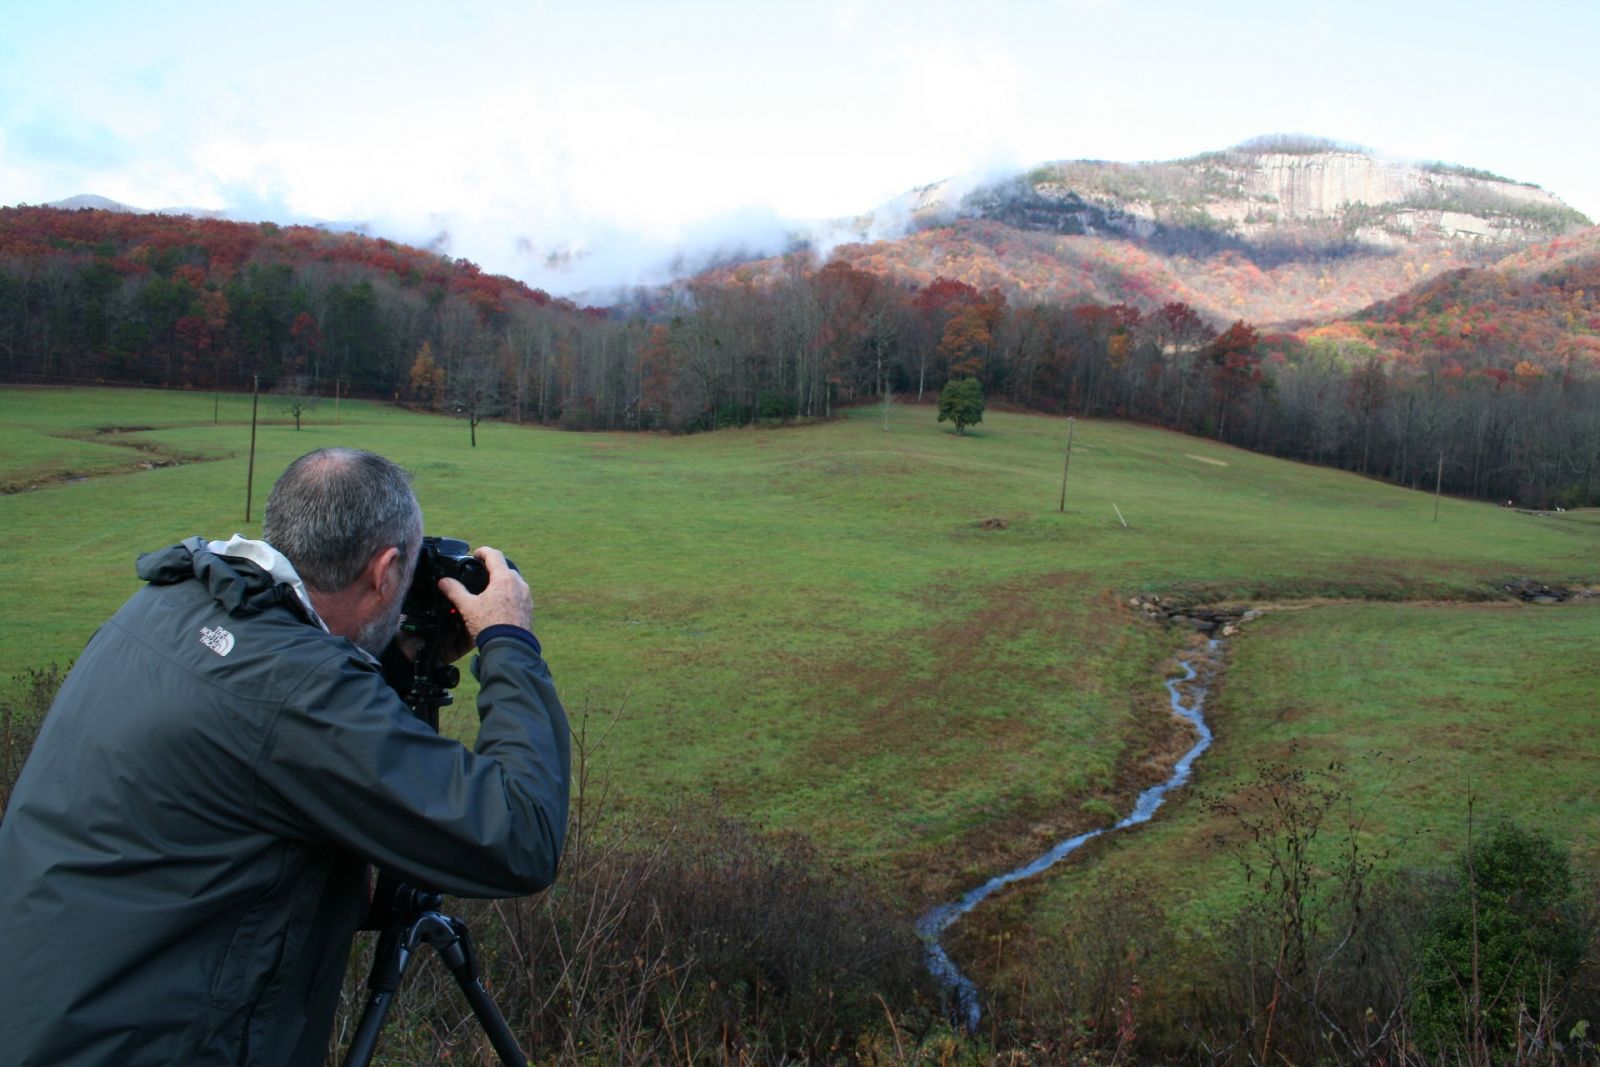 A photographer takes a photo of Table Rock at Grant Meadow, a protected site near S.C. Highway 11 in Pickens County. (Photo/Provided)